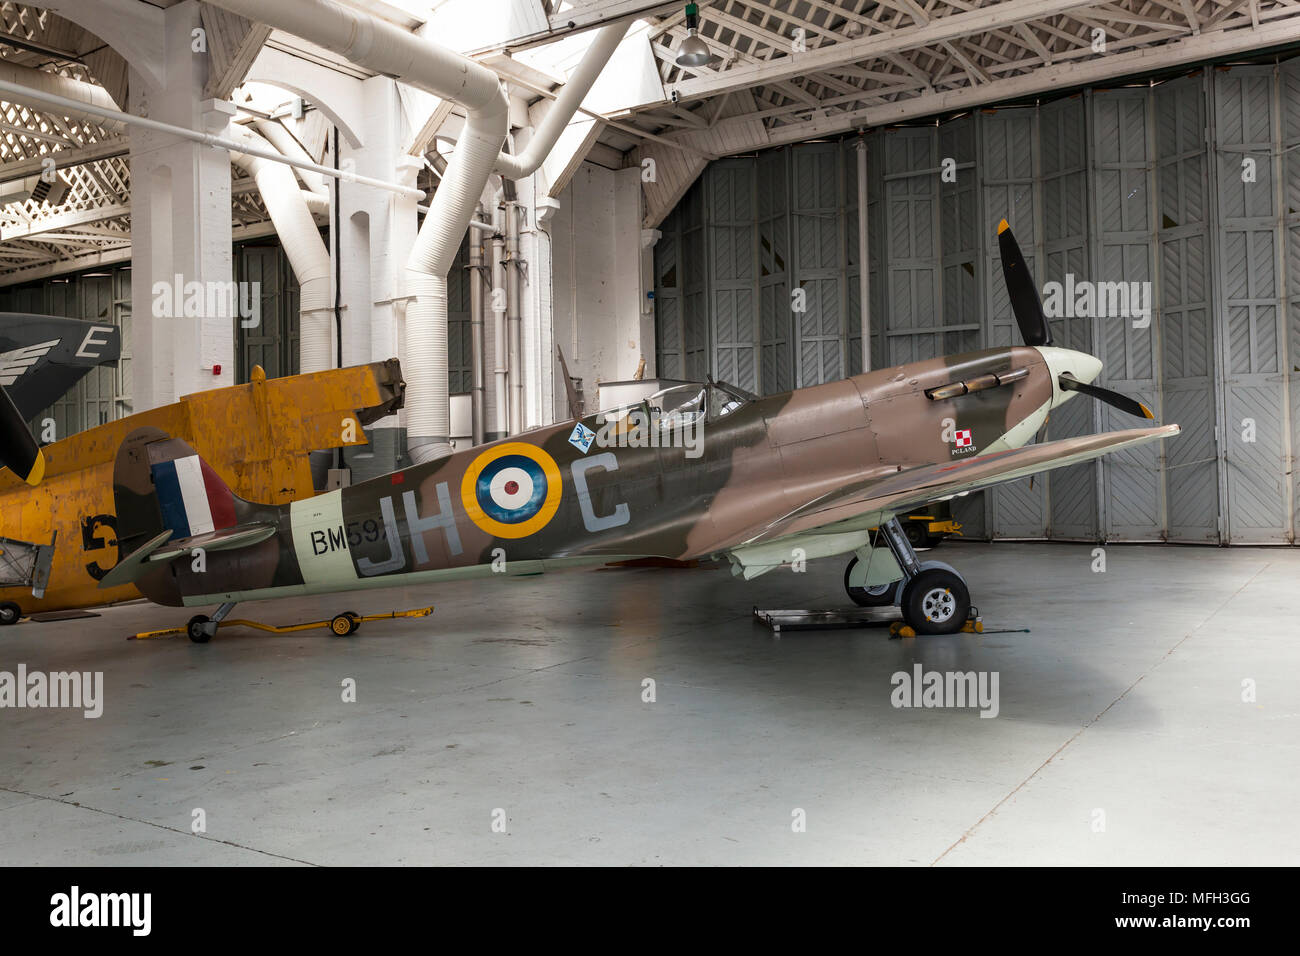 Duxford Air Museum. England, UK.  A WWII Submarine Spitfire on display in an aircraft hanger. Stock Photo